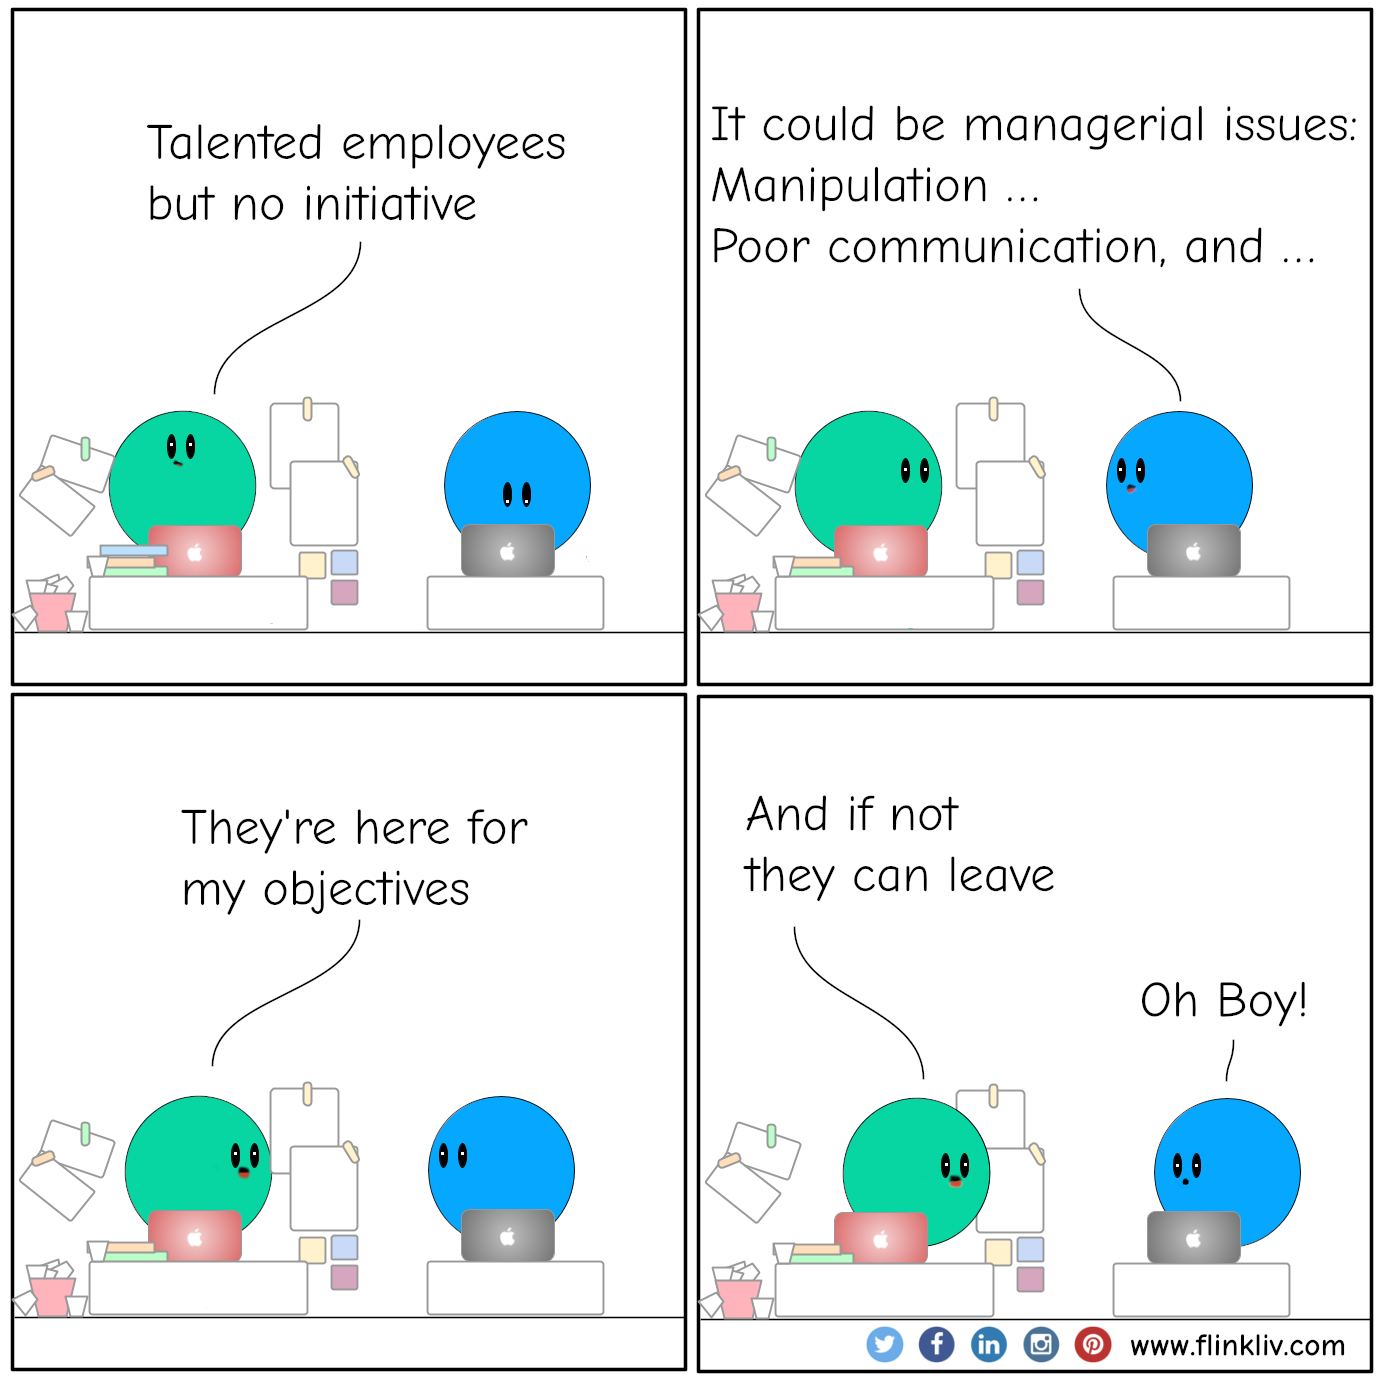 Conversation between A and B about how managers can affect talented people performance. A: Talented employees but no initiative B: It could be managerial issues: manipulation, poor communication, etc. A: They're here for my objectives A: And if not, they can leave. By flinkliv.com